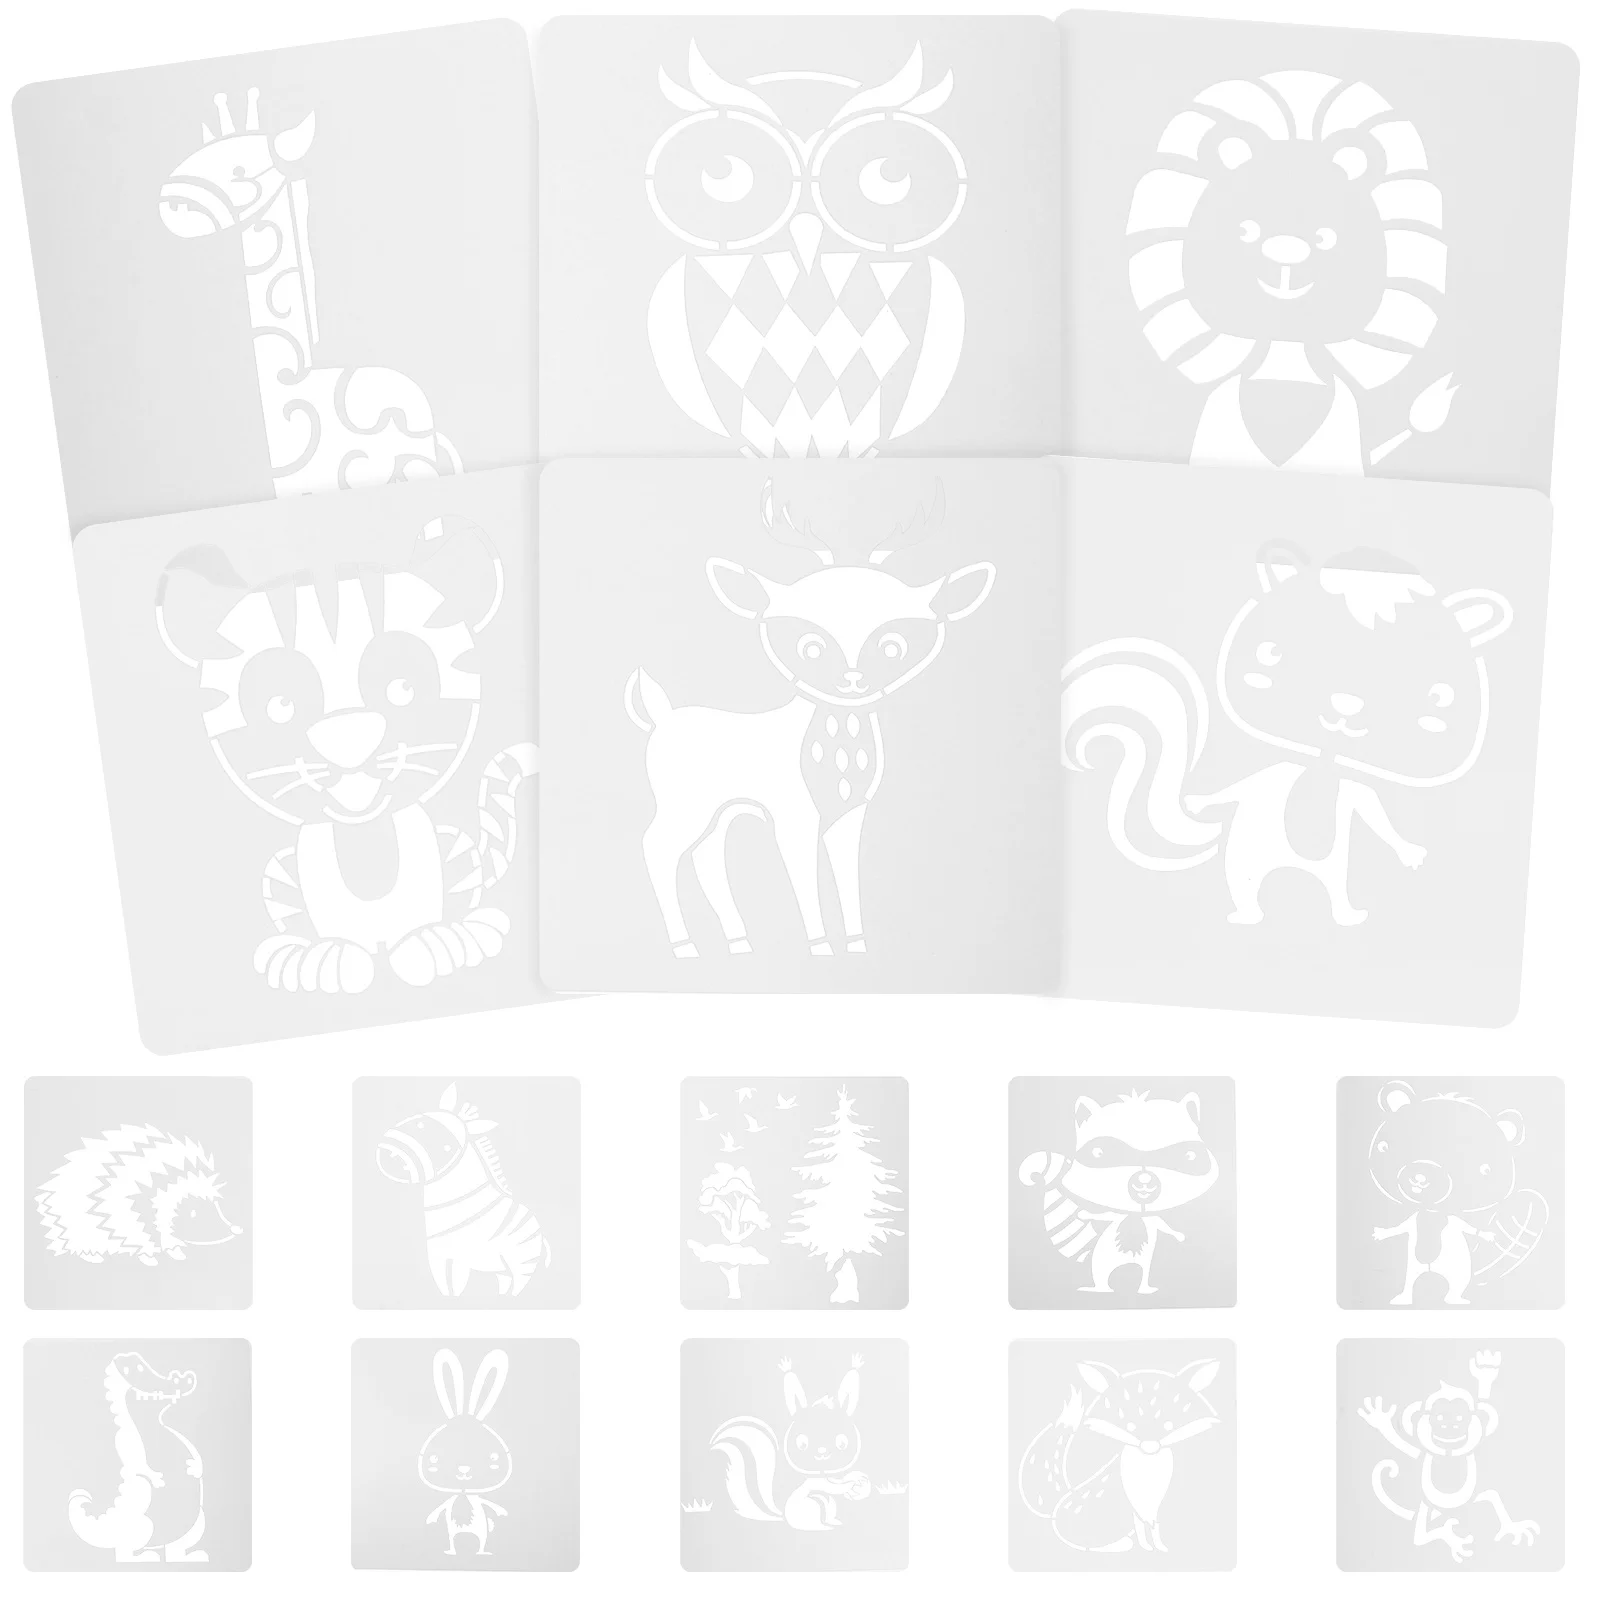 

16 Pcs Silk Screen Stencils Wall Template Wood Painting Encaustic Tile Flooring Projects Fabric Furniture Kids